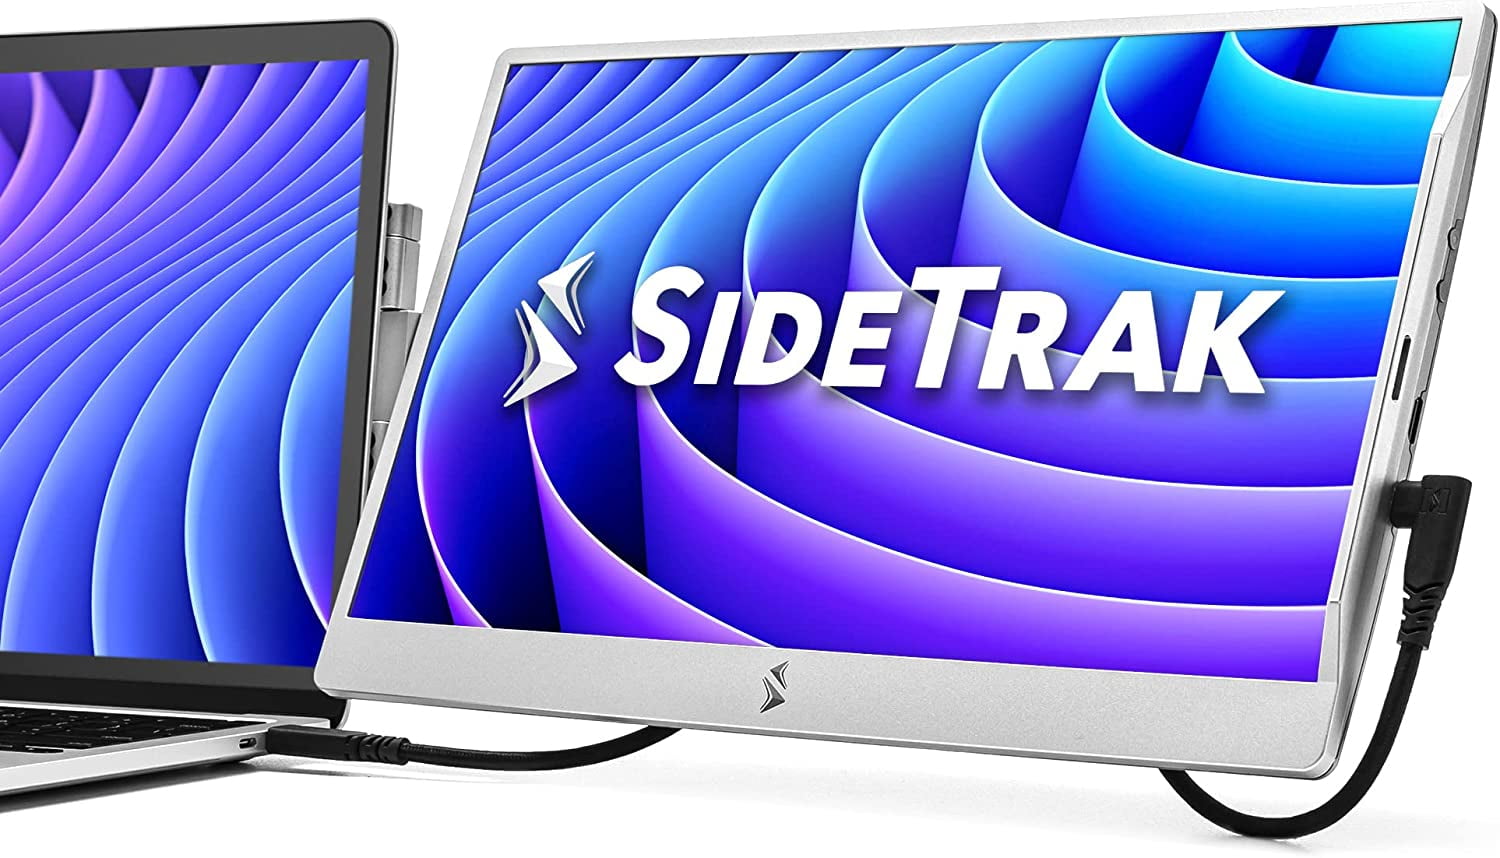 SideTrak Swivel 12.5” Patented Attachable Portable Monitor for Laptop | FHD  TFT Laptop Dual Screen | Mac, PC & Chrome Compatible | Fits All Laptops 